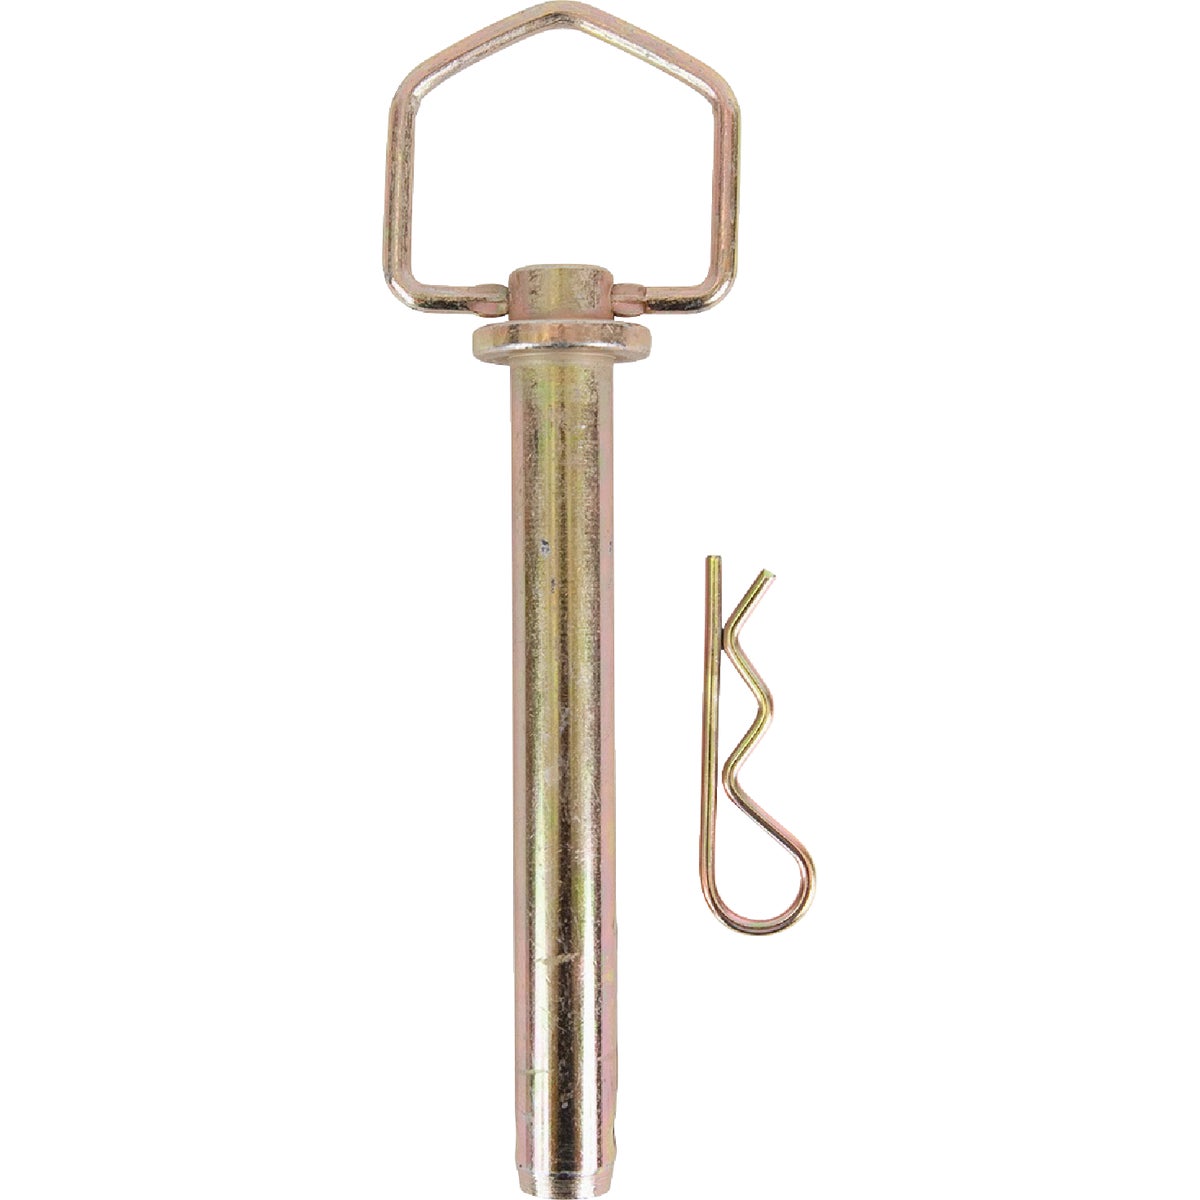 Item 738376, Yellow zinc plated hitch pin with spring wire swivel handle.